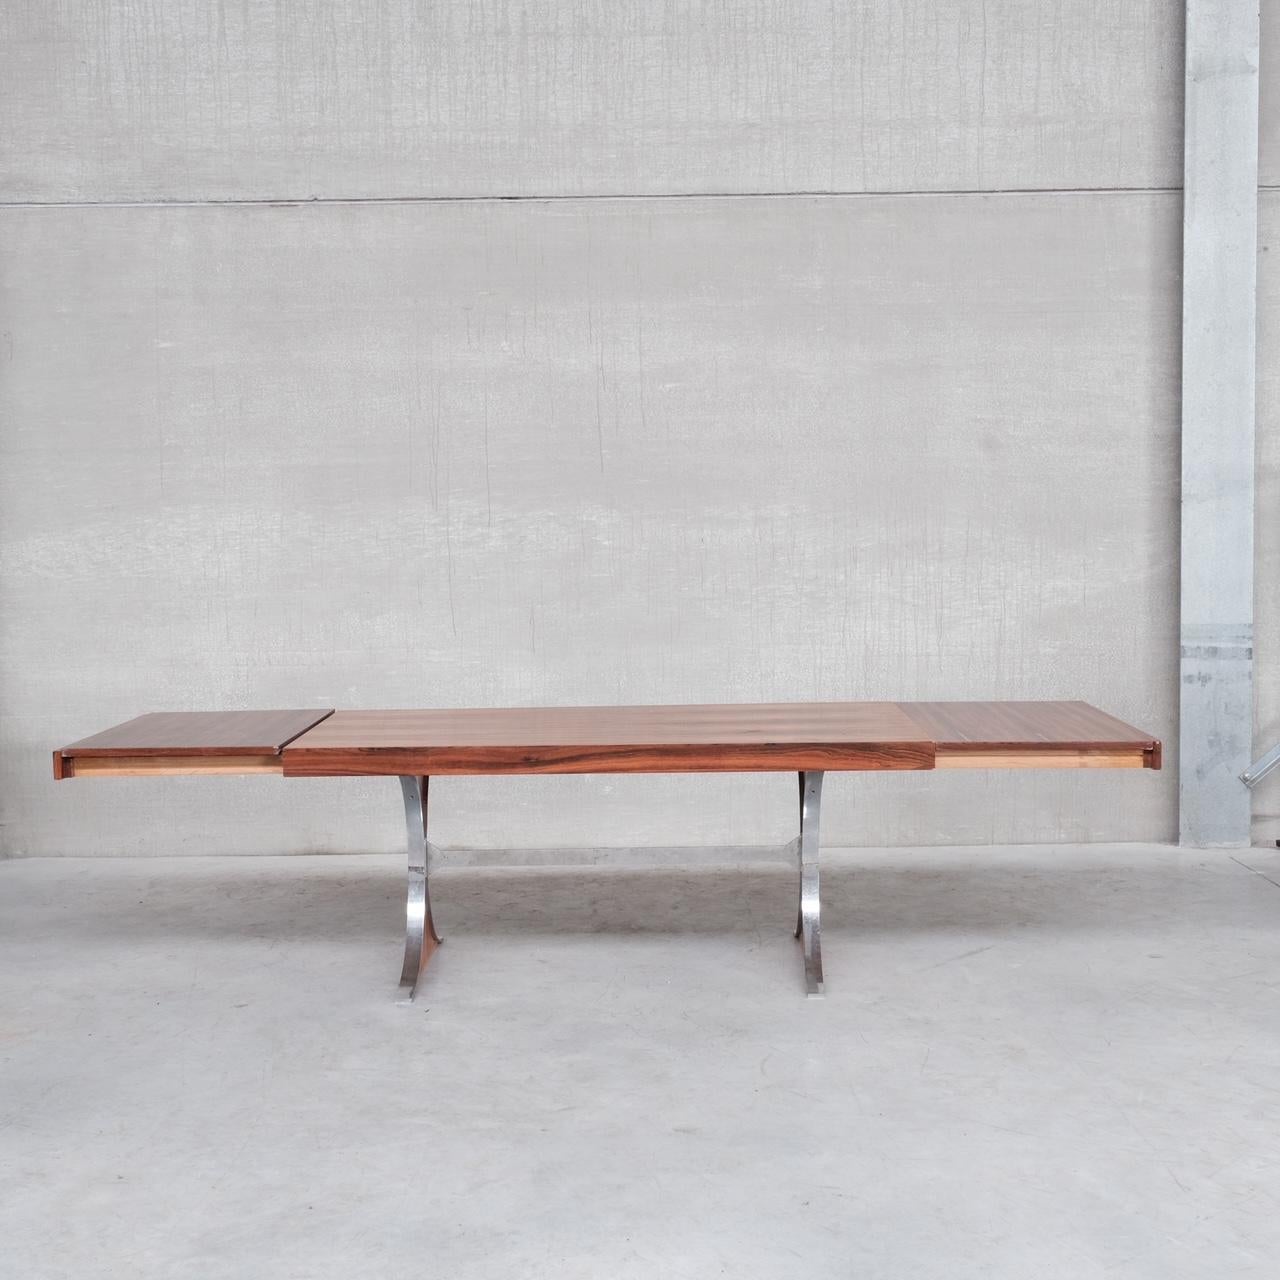 A rosewood dining table by René-Jean Caillette. 

France, c1961. 

'Sylvie' model. 

Has optional two additional leaves which add 58 cm each. 

Remains in good vintage condition, some small lifting here and there but no veneer tears. The